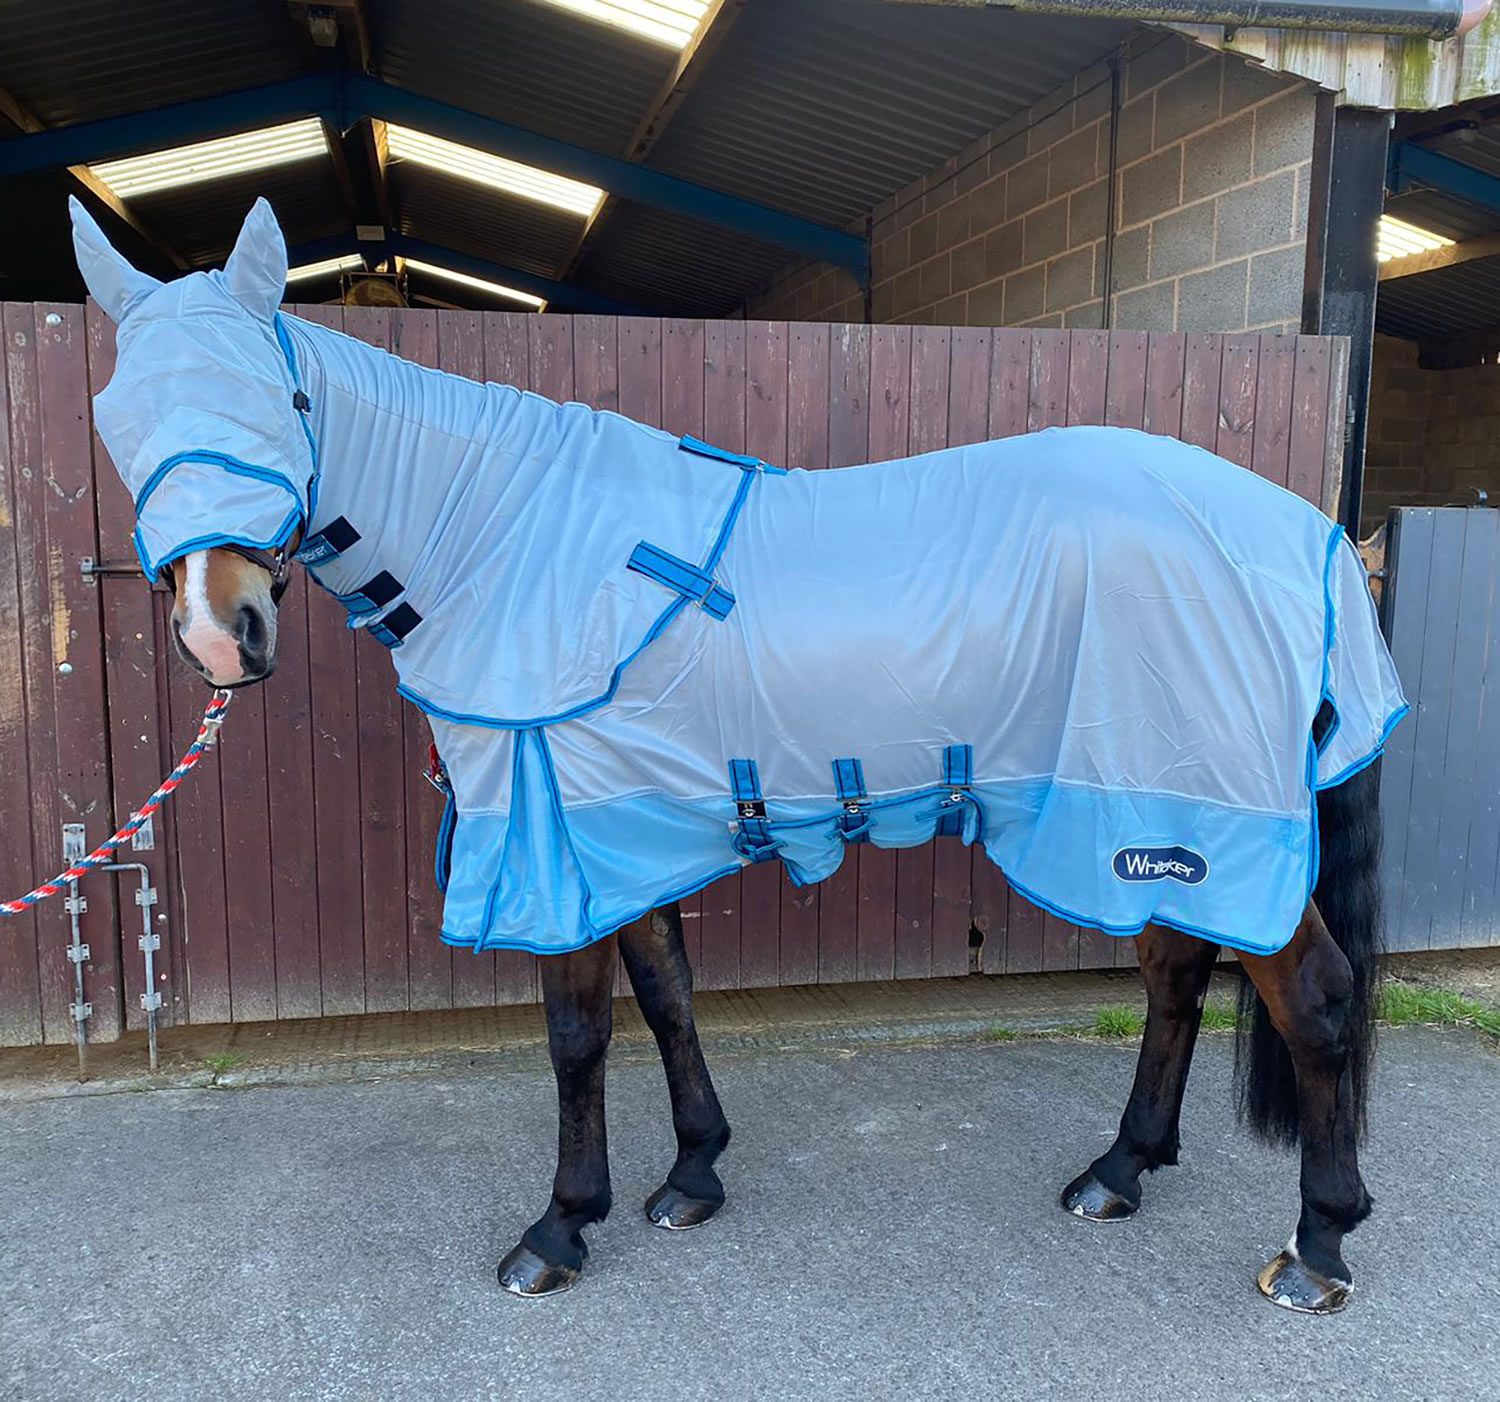 WHITAKER AIRTON FLY RUG LIGHT BLUE